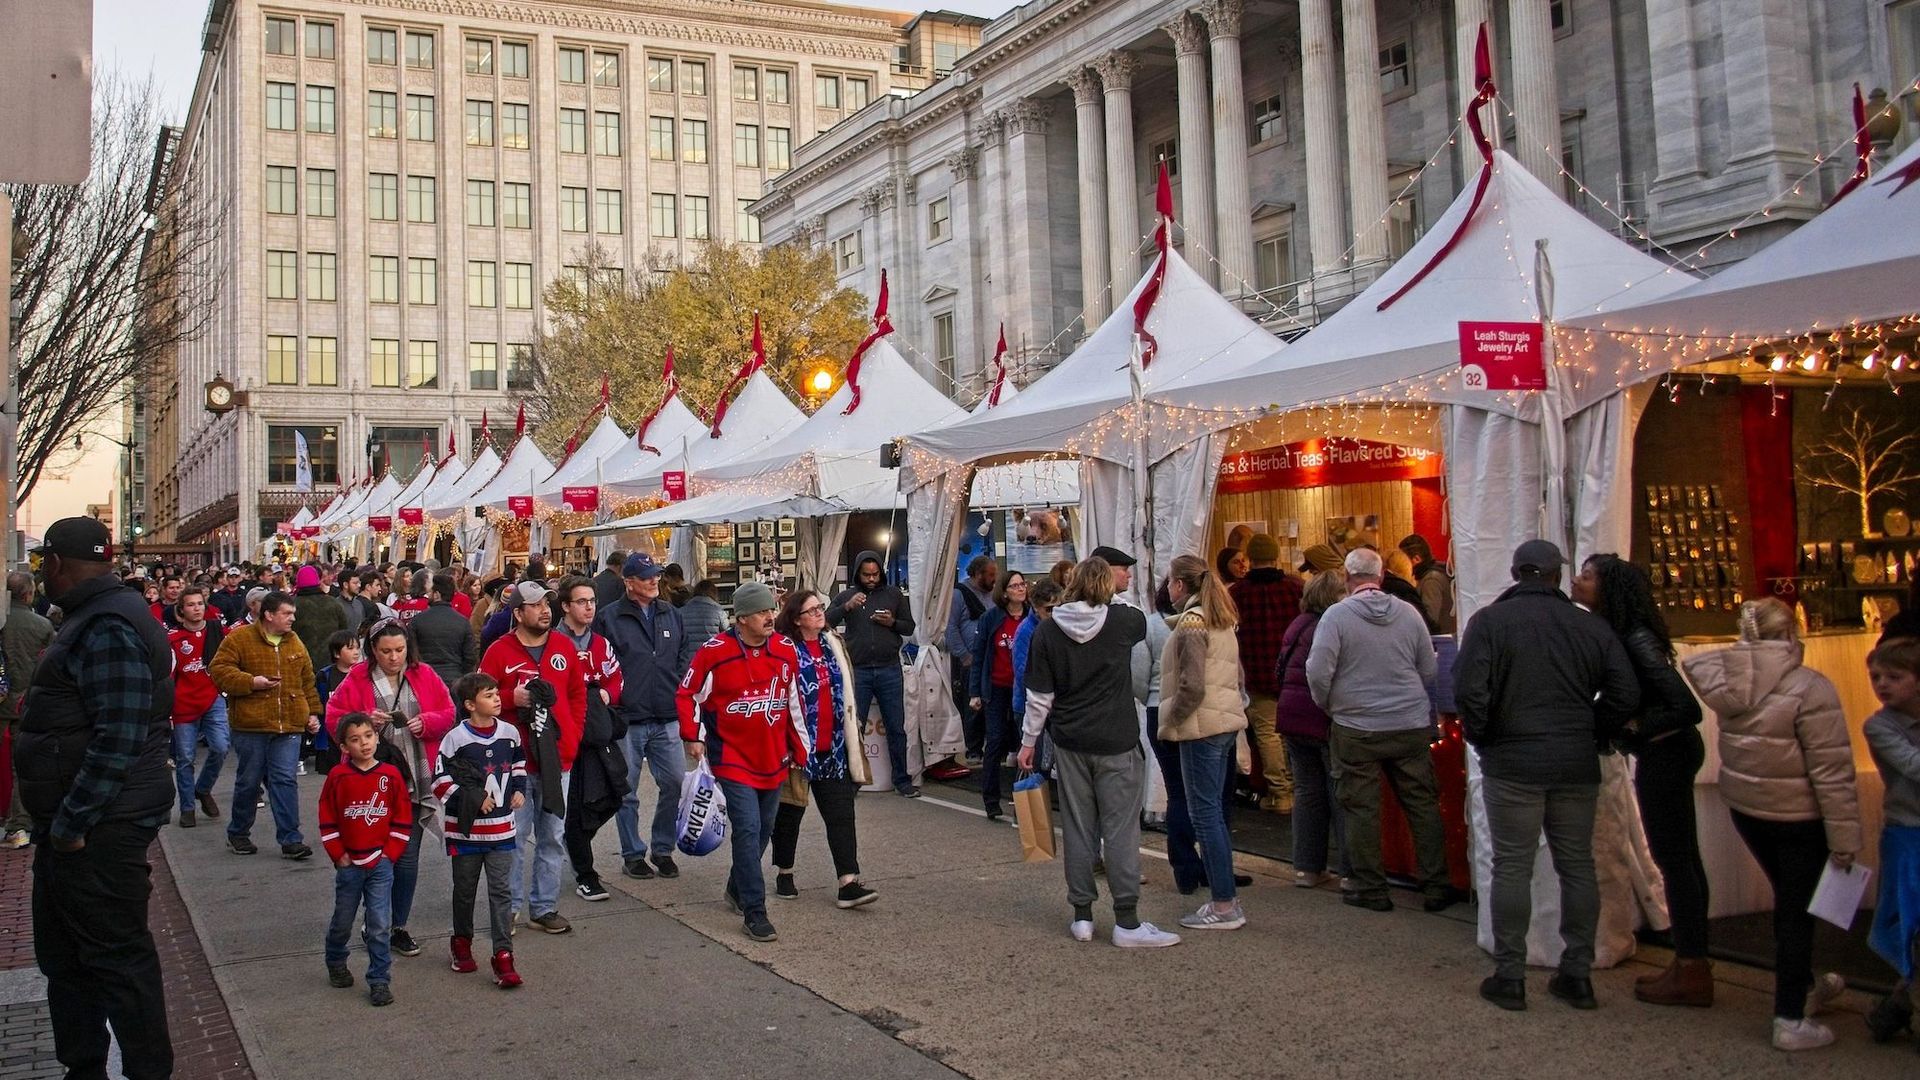 People walk through a holiday market in downtown DC